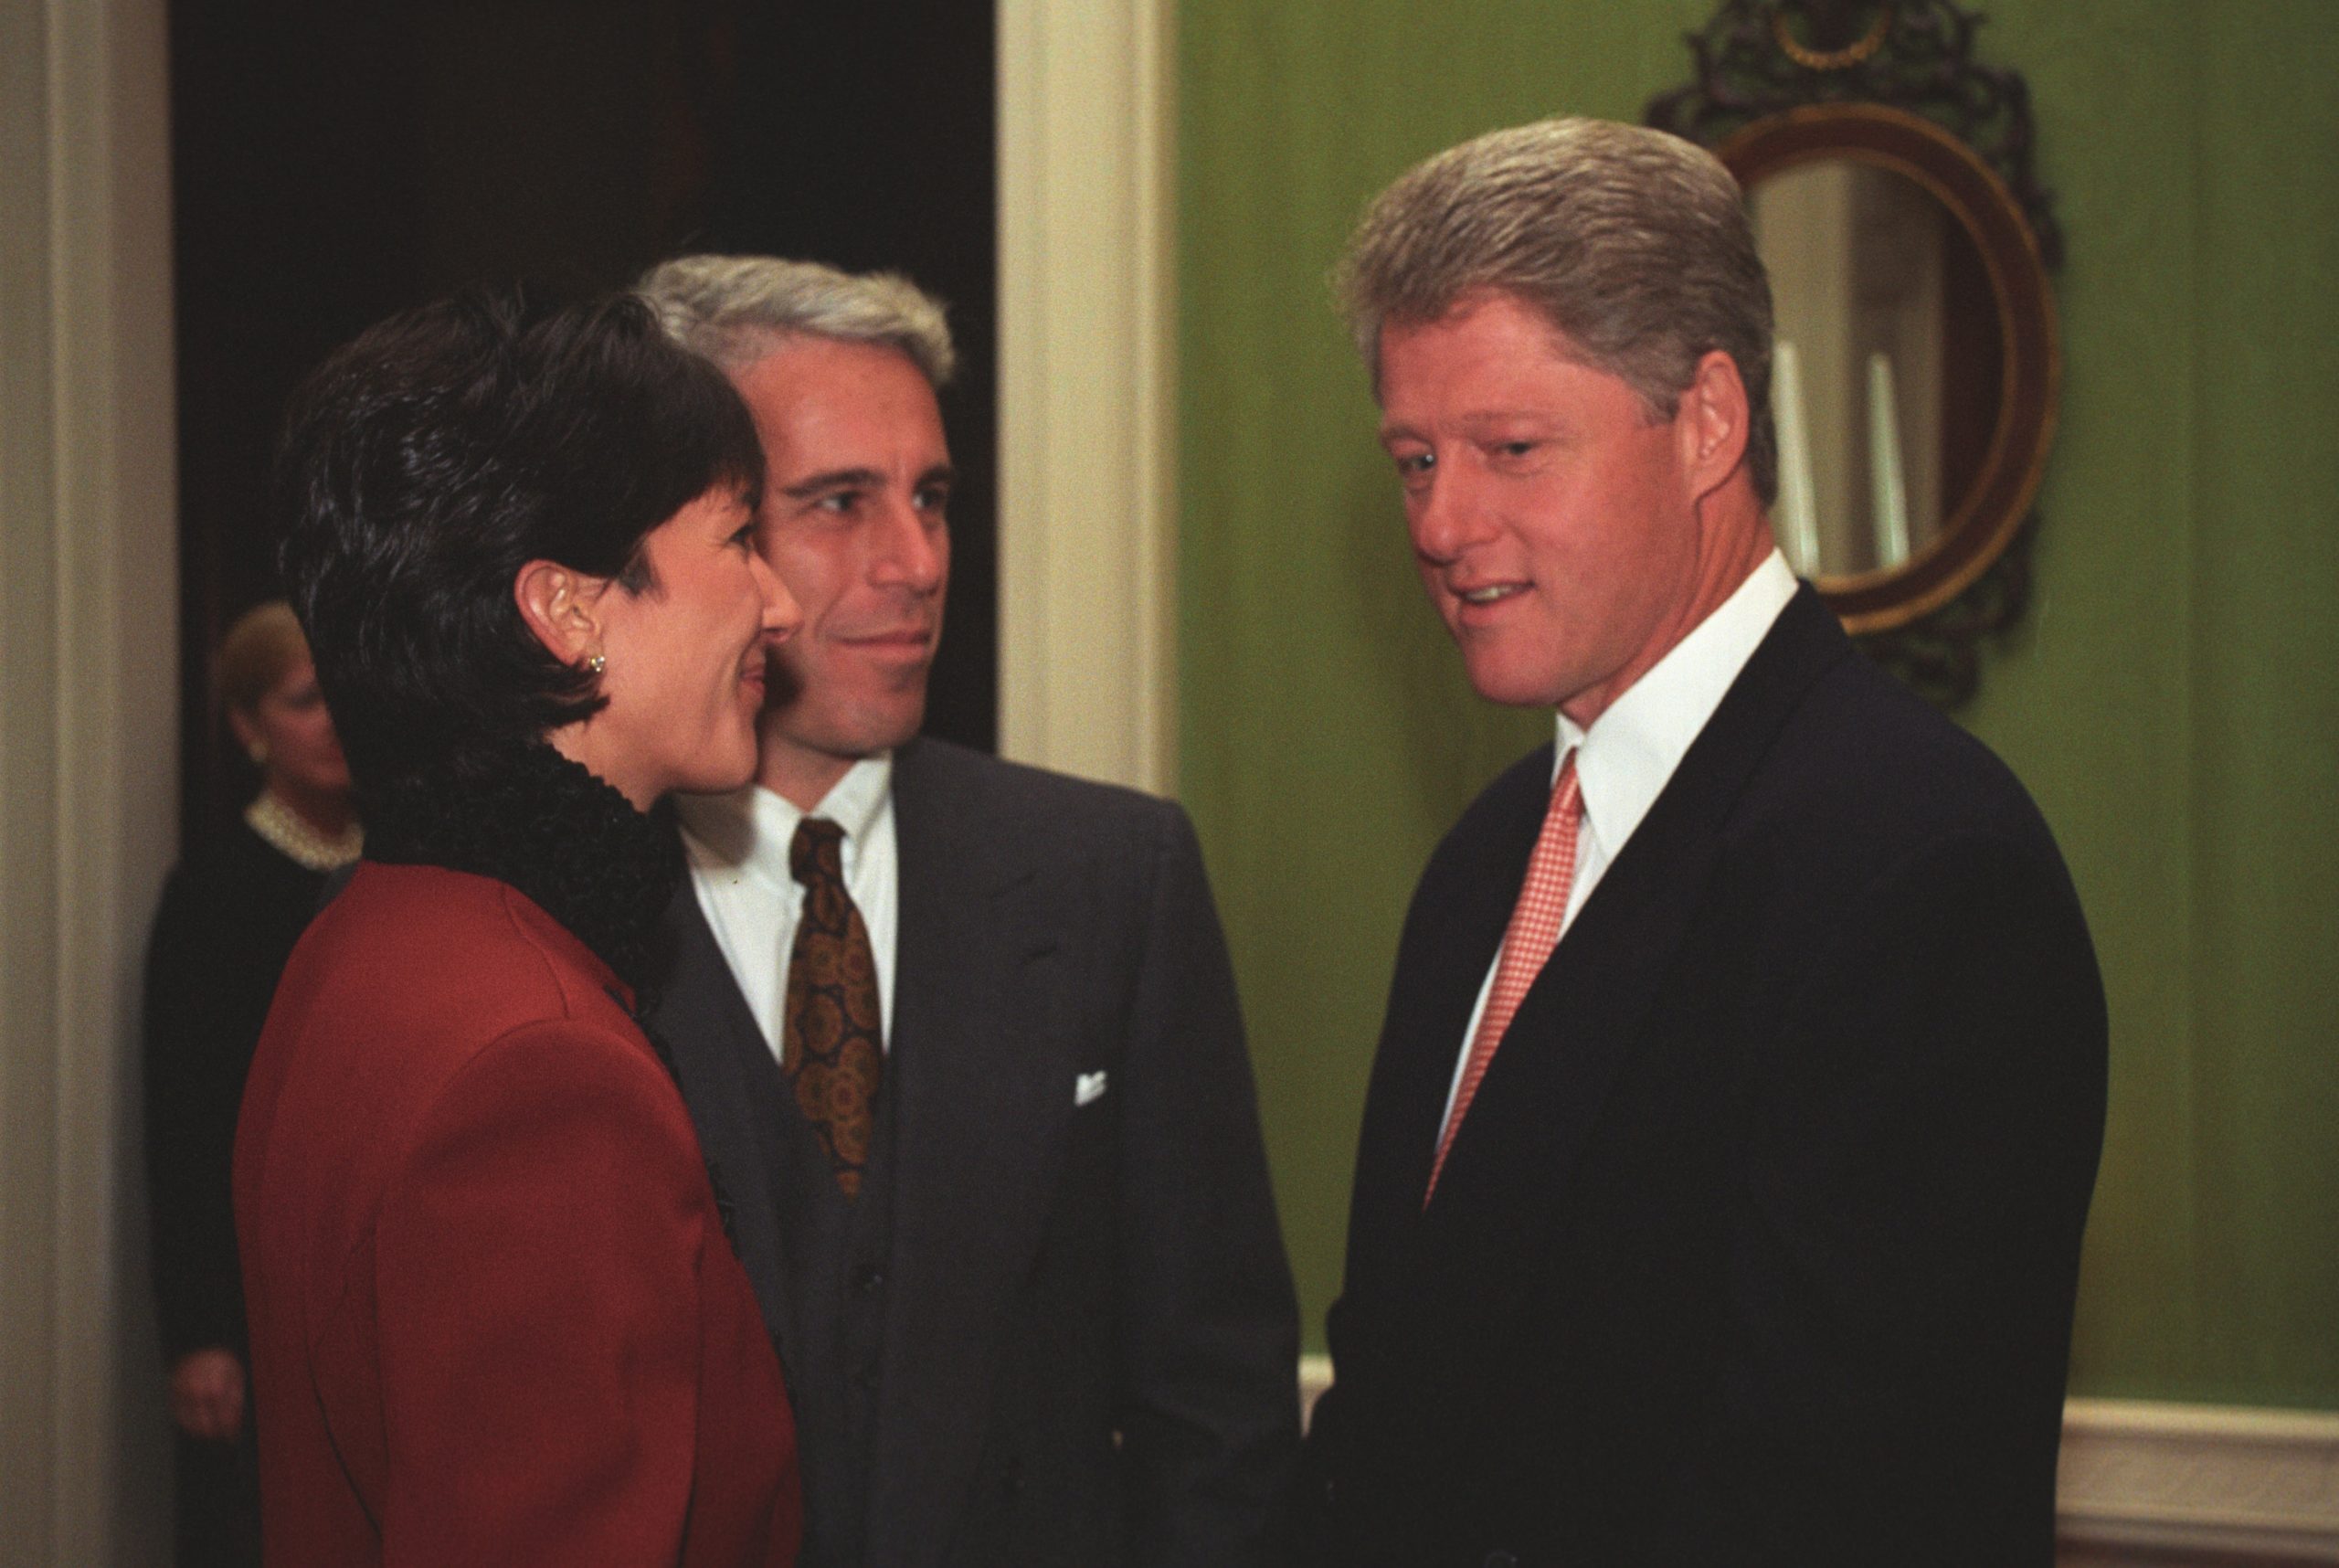 Photo courtesy of the William J. Clinton Presidential Library.